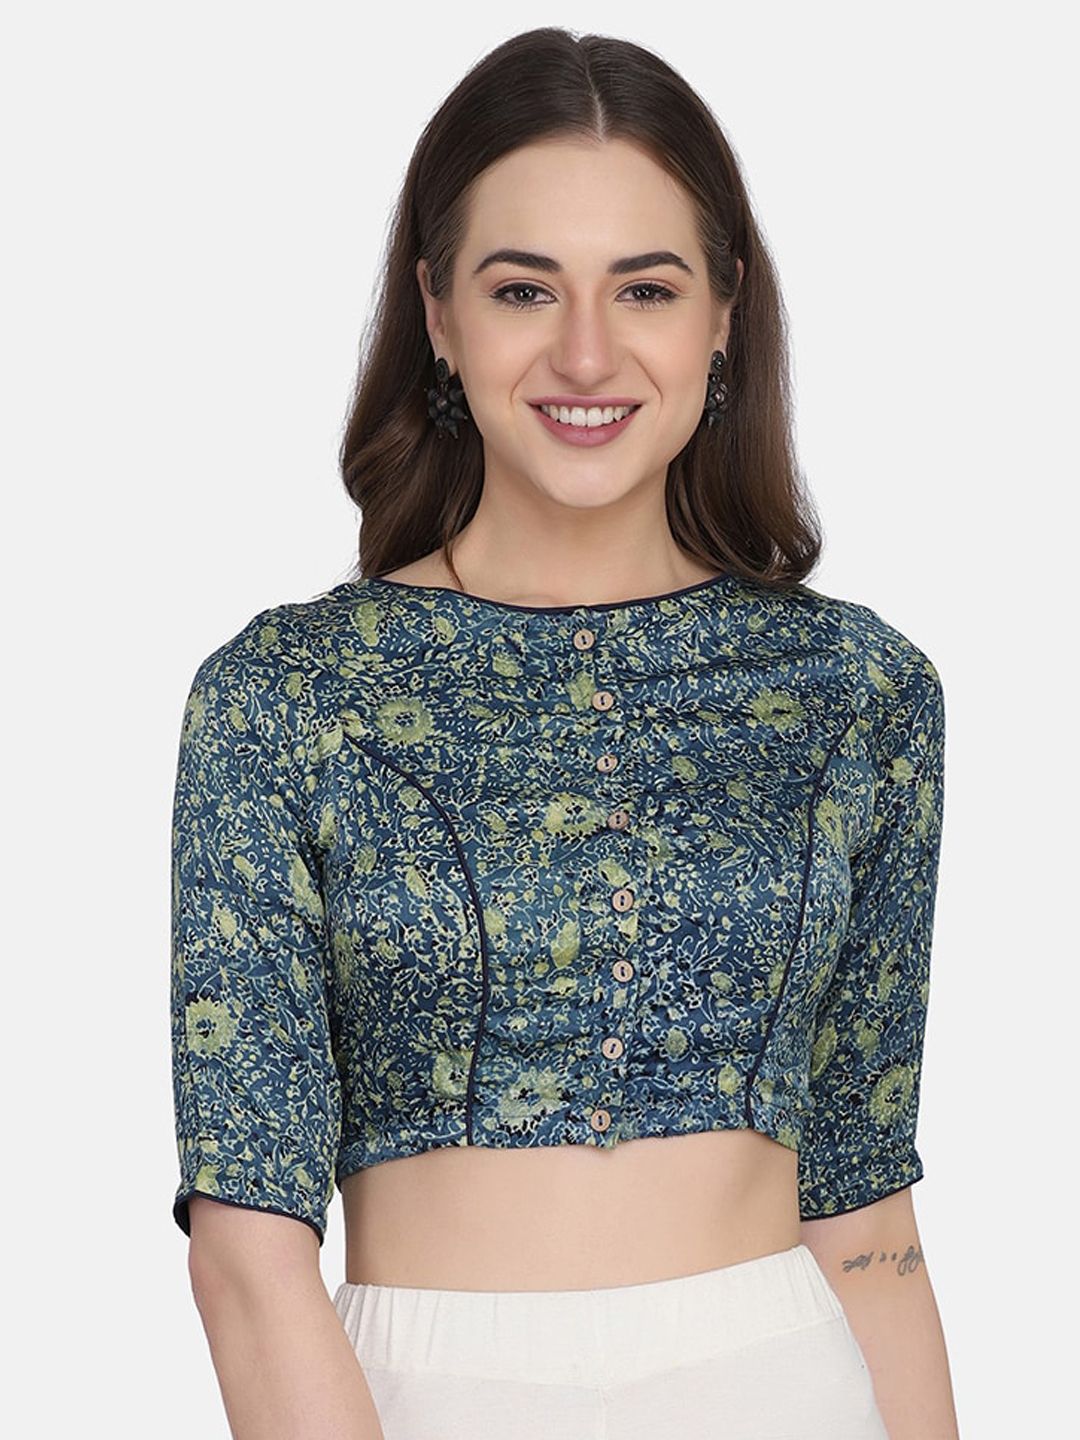 THE WEAVE TRAVELLER Women Blue & Green Floral Printed Saree Blouse Price in India